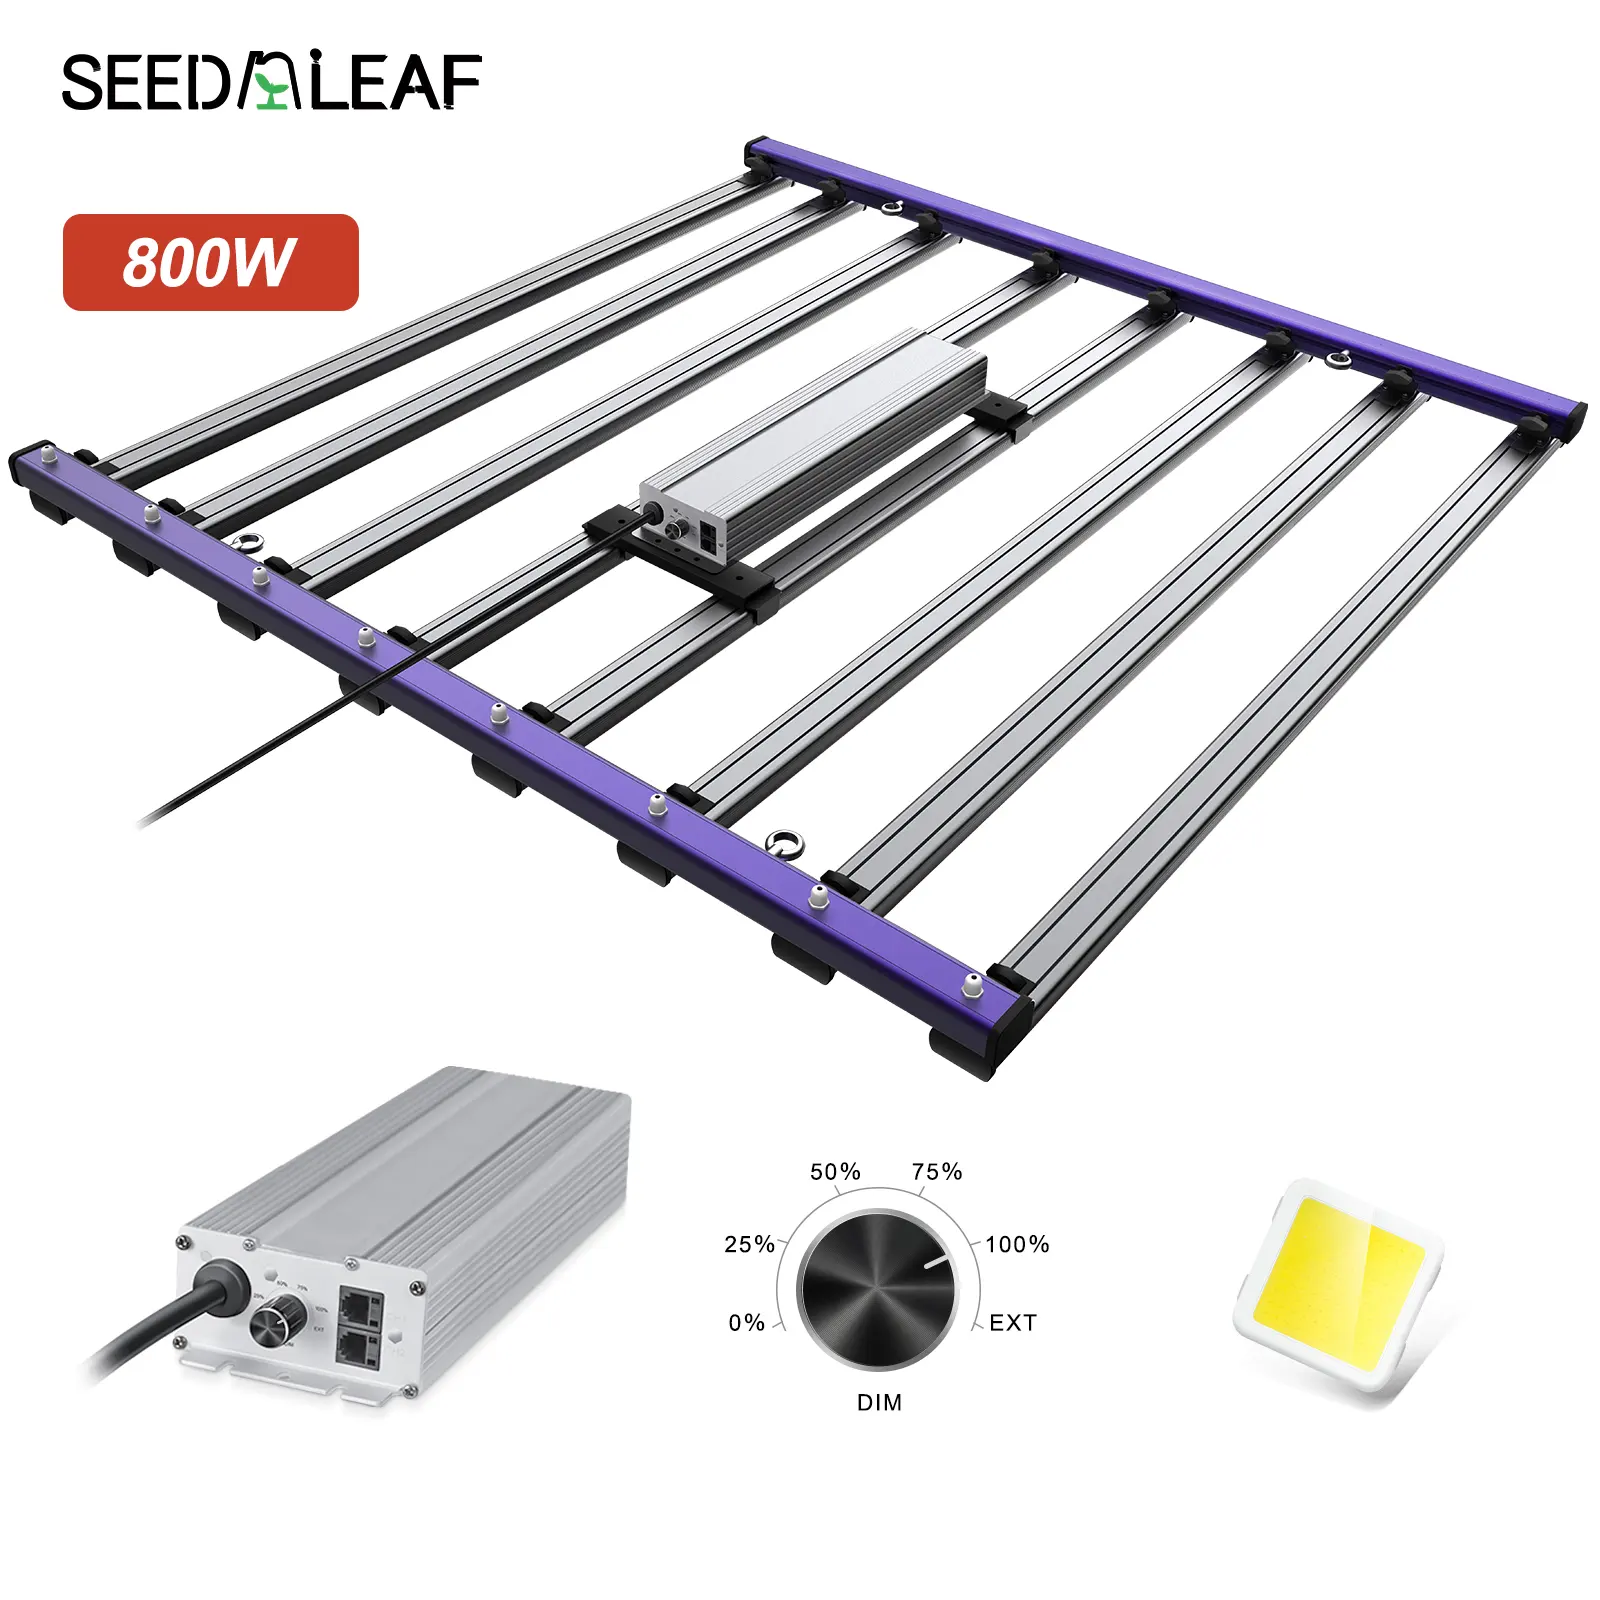 High Power Commercial 800W 8 Bar Led Grow Light Full SpectrumSamsung LM301H Chip Indoor Led Grow Light